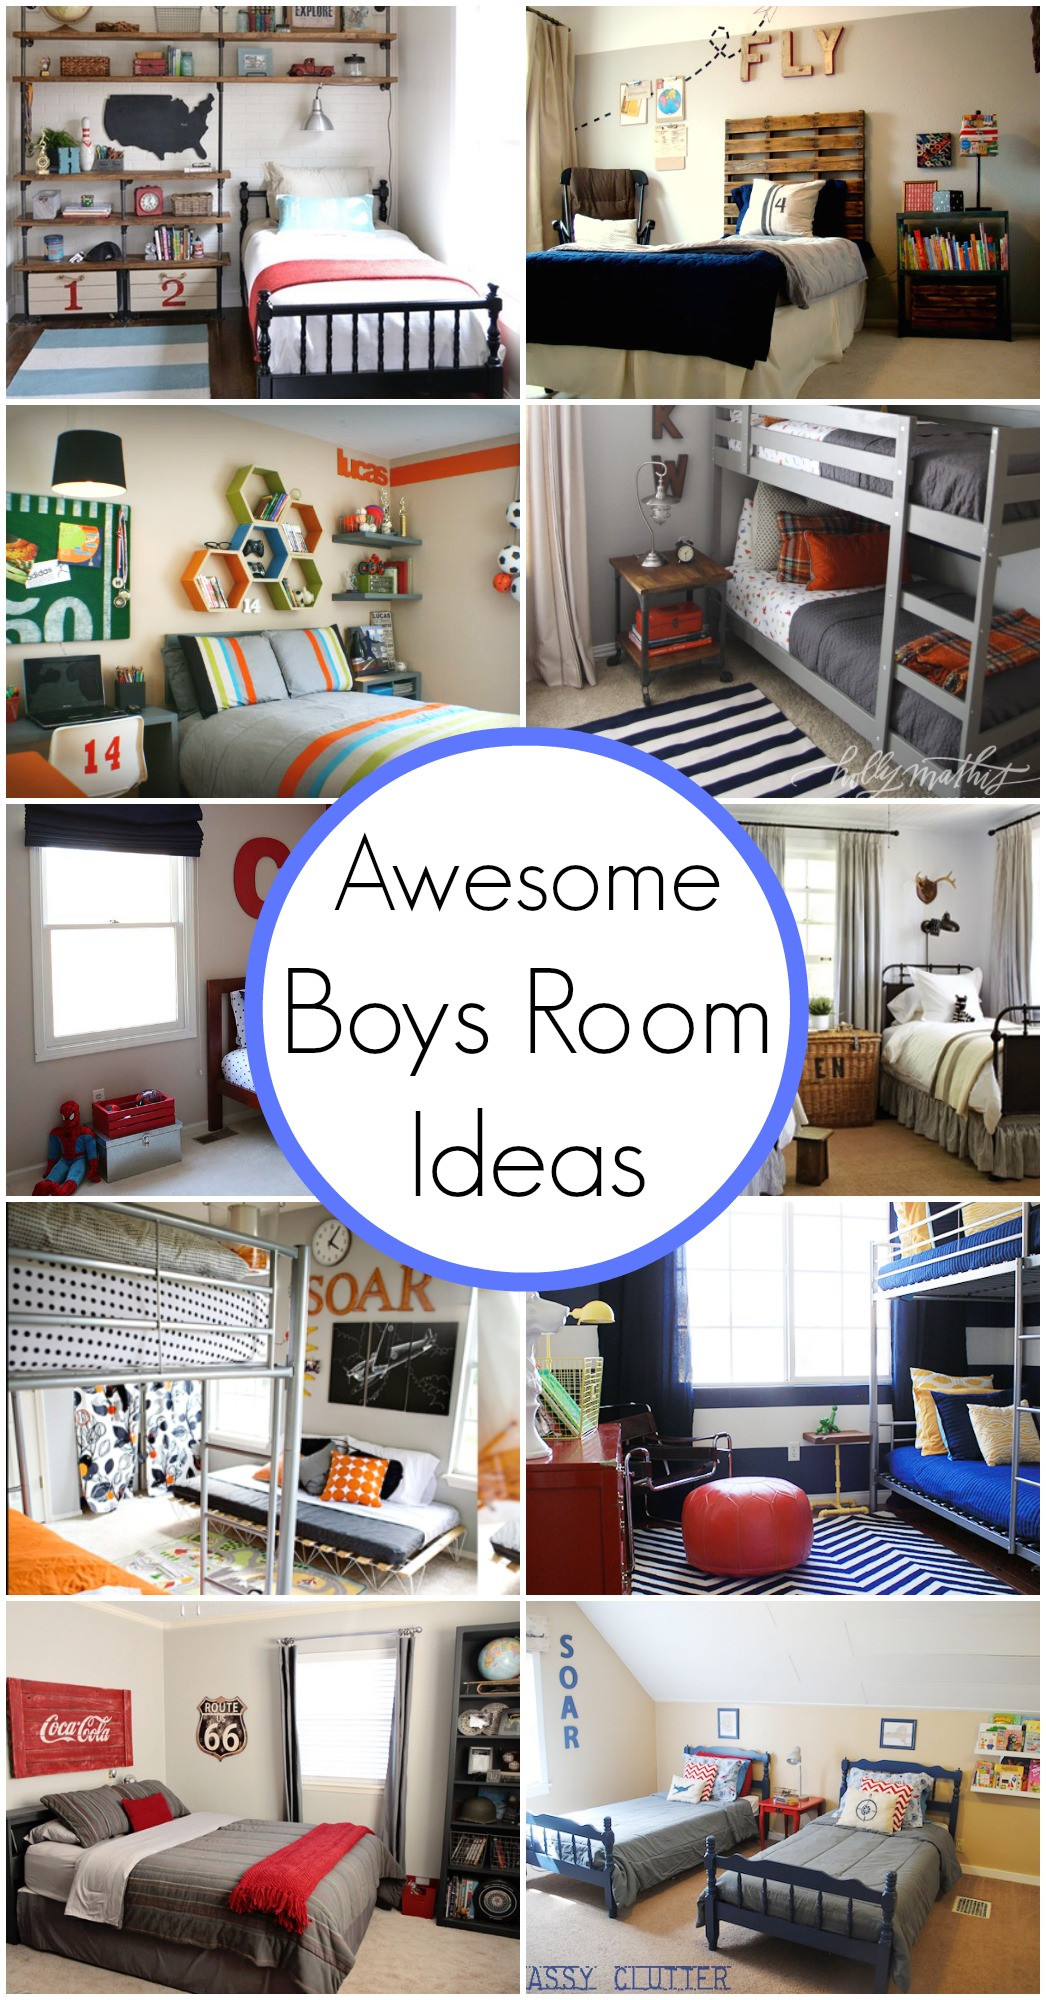 Awesome Boy Bedroom Ideas
 10 Awesome Boy s Bedroom Ideas Classy Clutter